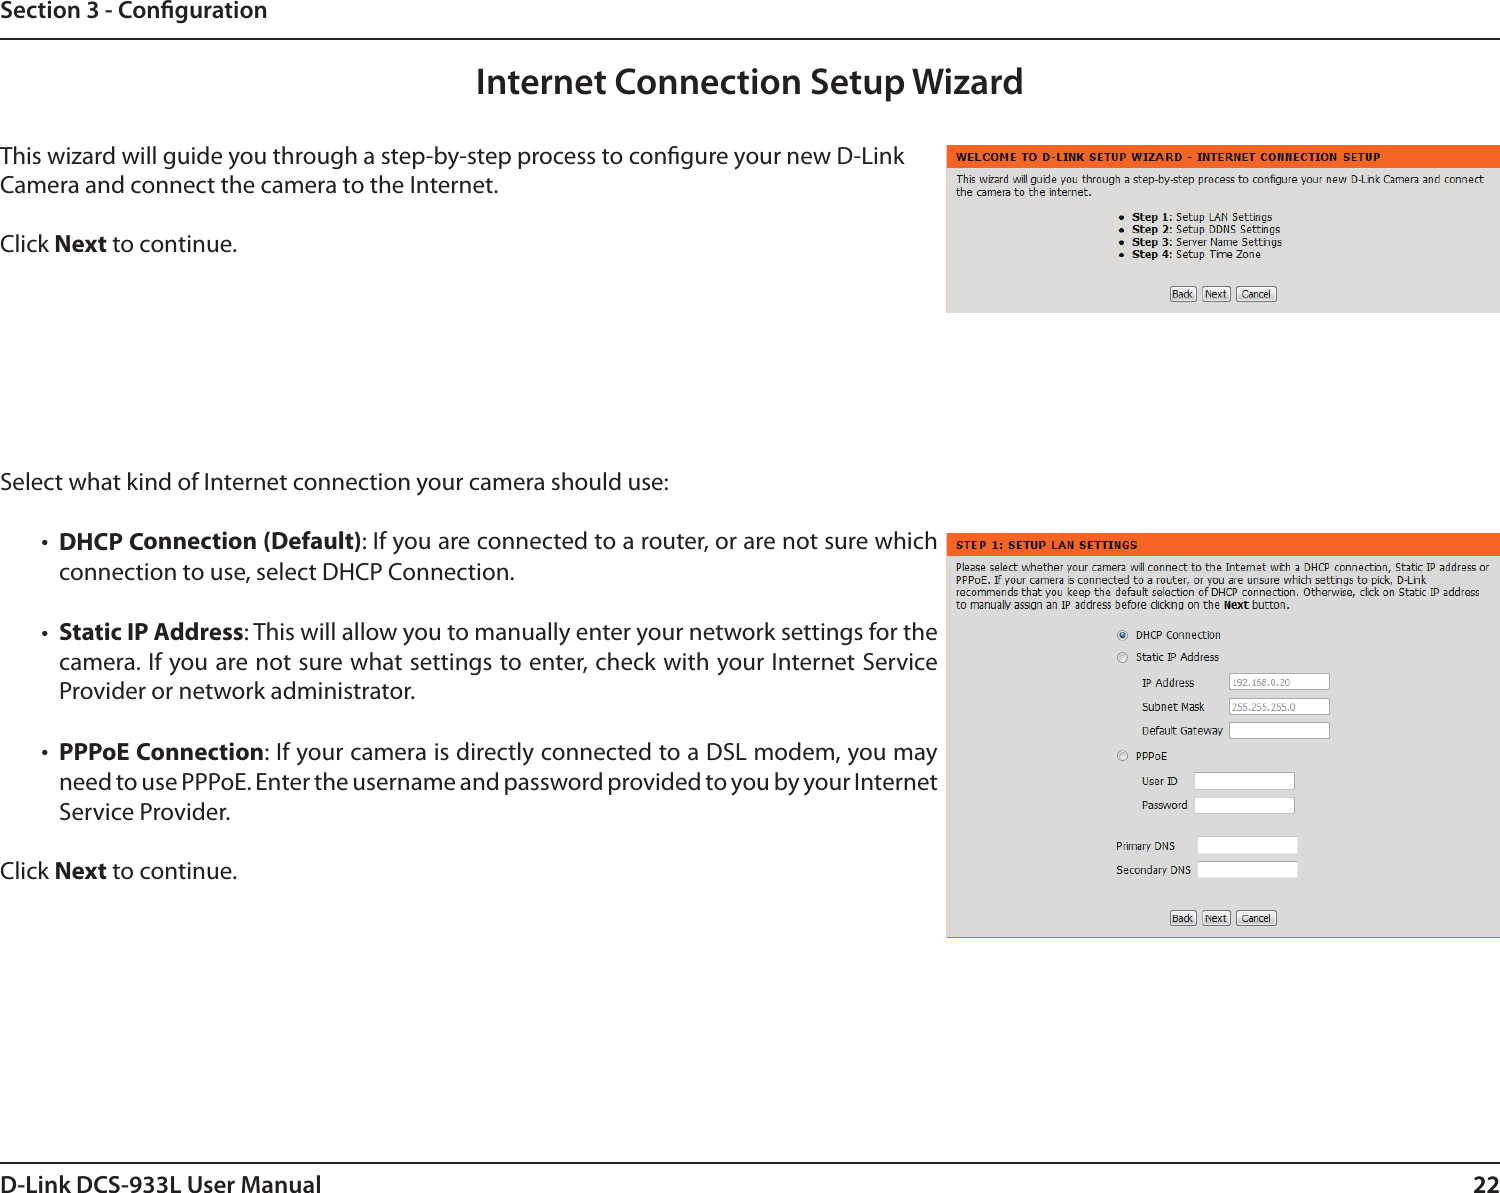 22D-Link DCS-933L User Manual 22Section 3 - CongurationInternet Connection Setup WizardThis wizard will guide you through a step-by-step process to congure your new D-Link Camera and connect the camera to the Internet. Click Next to continue.Select what kind of Internet connection your camera should use:•  DHCP Connection (Default): If you are connected to a router, or are not sure which connection to use, select DHCP Connection.•  Static IP Address: This will allow you to manually enter your network settings for the camera. If you are not sure what settings to enter, check with your Internet Service Provider or network administrator.•  PPPoE Connection: If your camera is directly connected to a DSL modem, you may need to use PPPoE. Enter the username and password provided to you by your Internet  Service Provider.Click Next to continue.